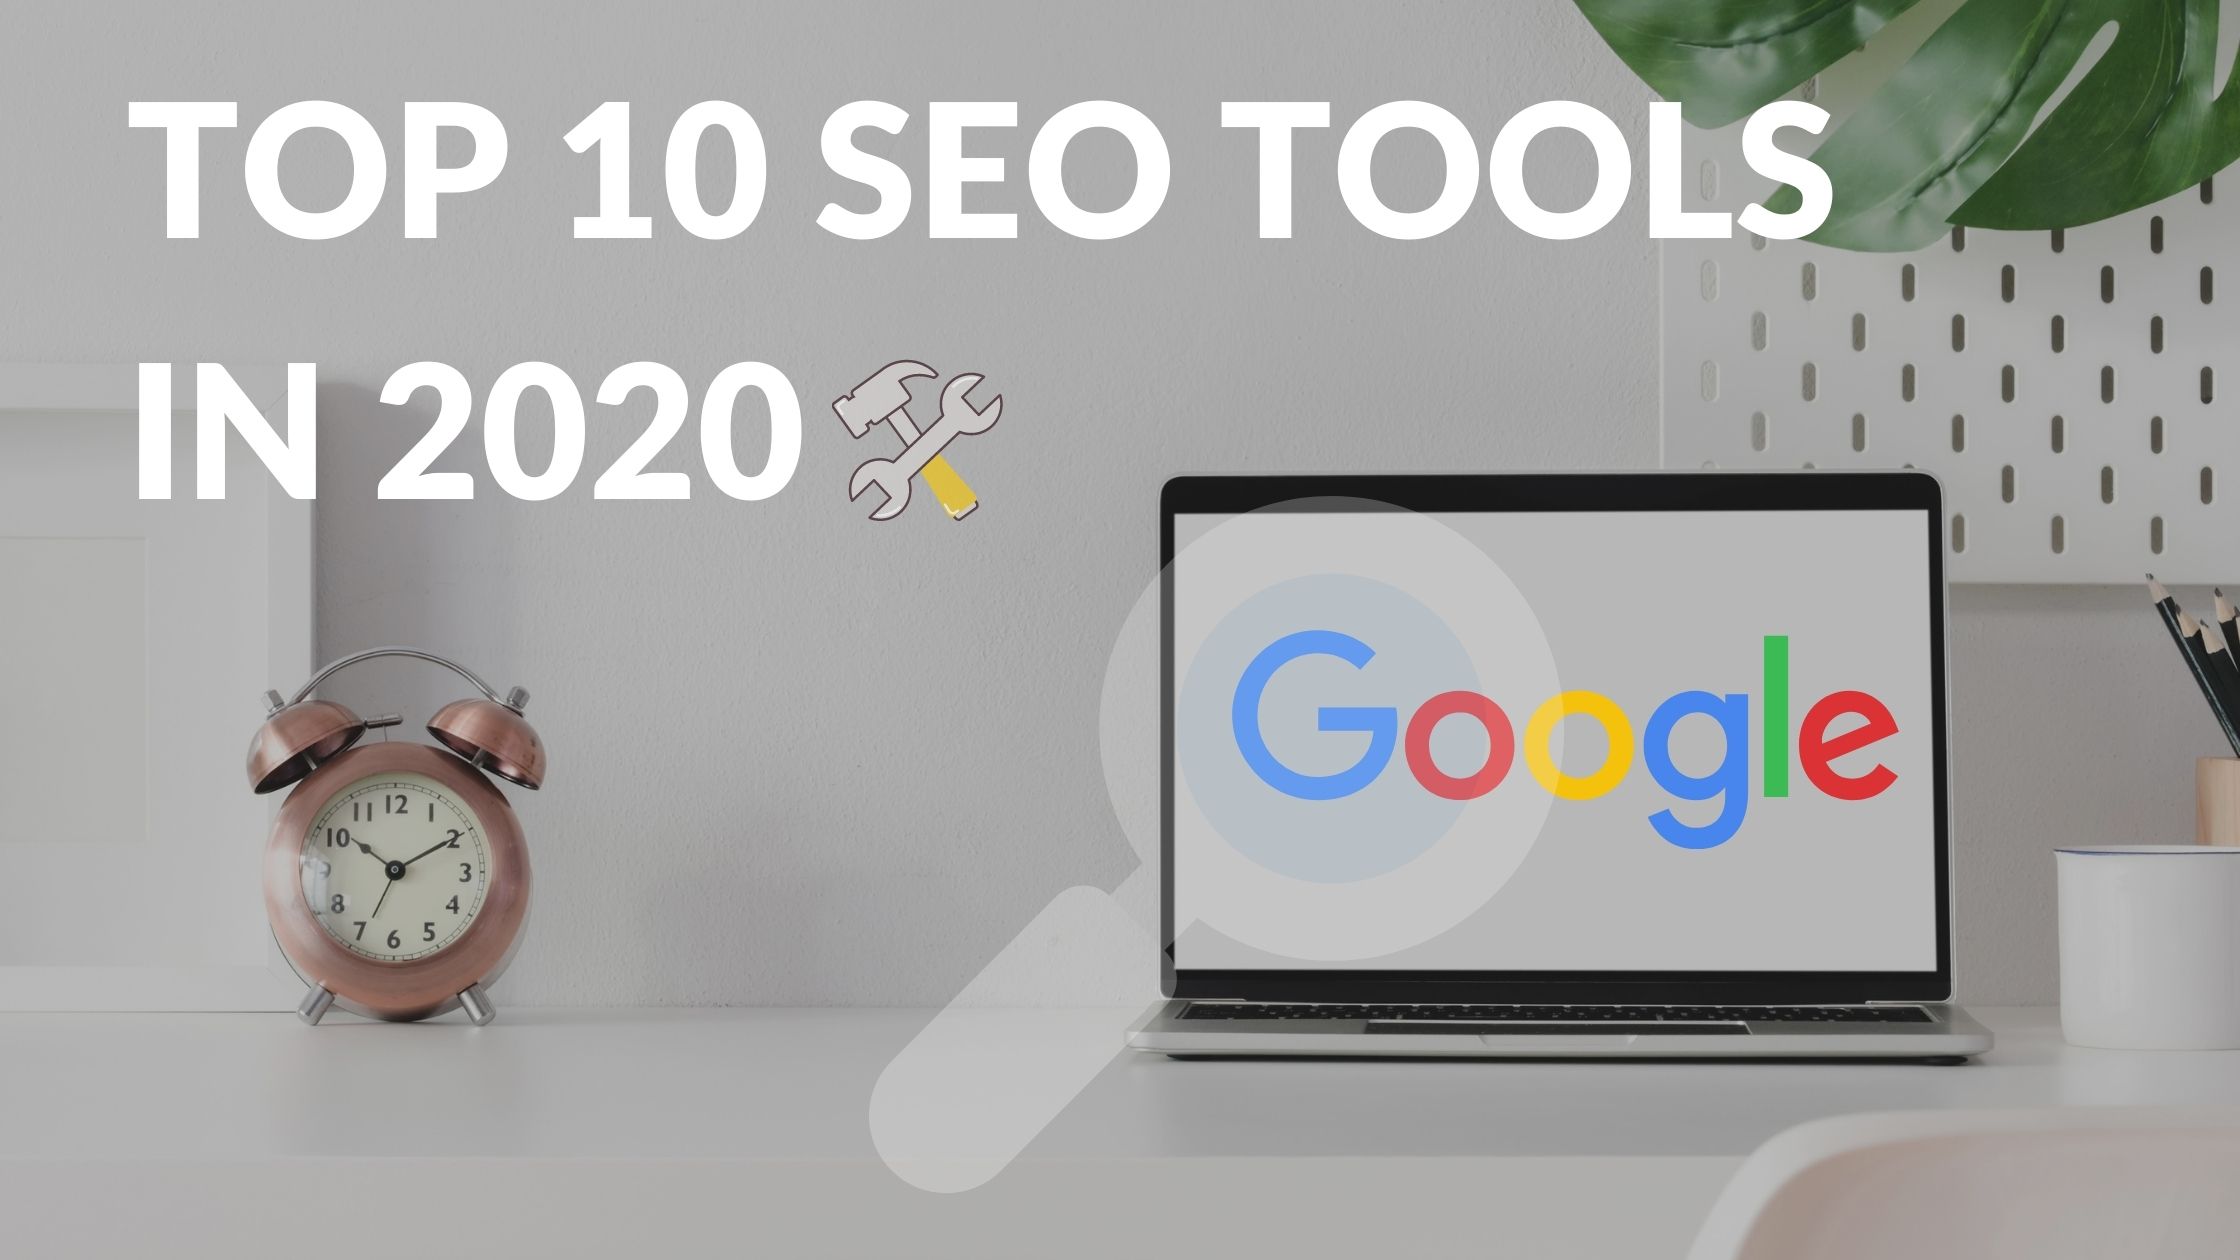 Top 10 Seo Tools In 2020 The Post City 4003